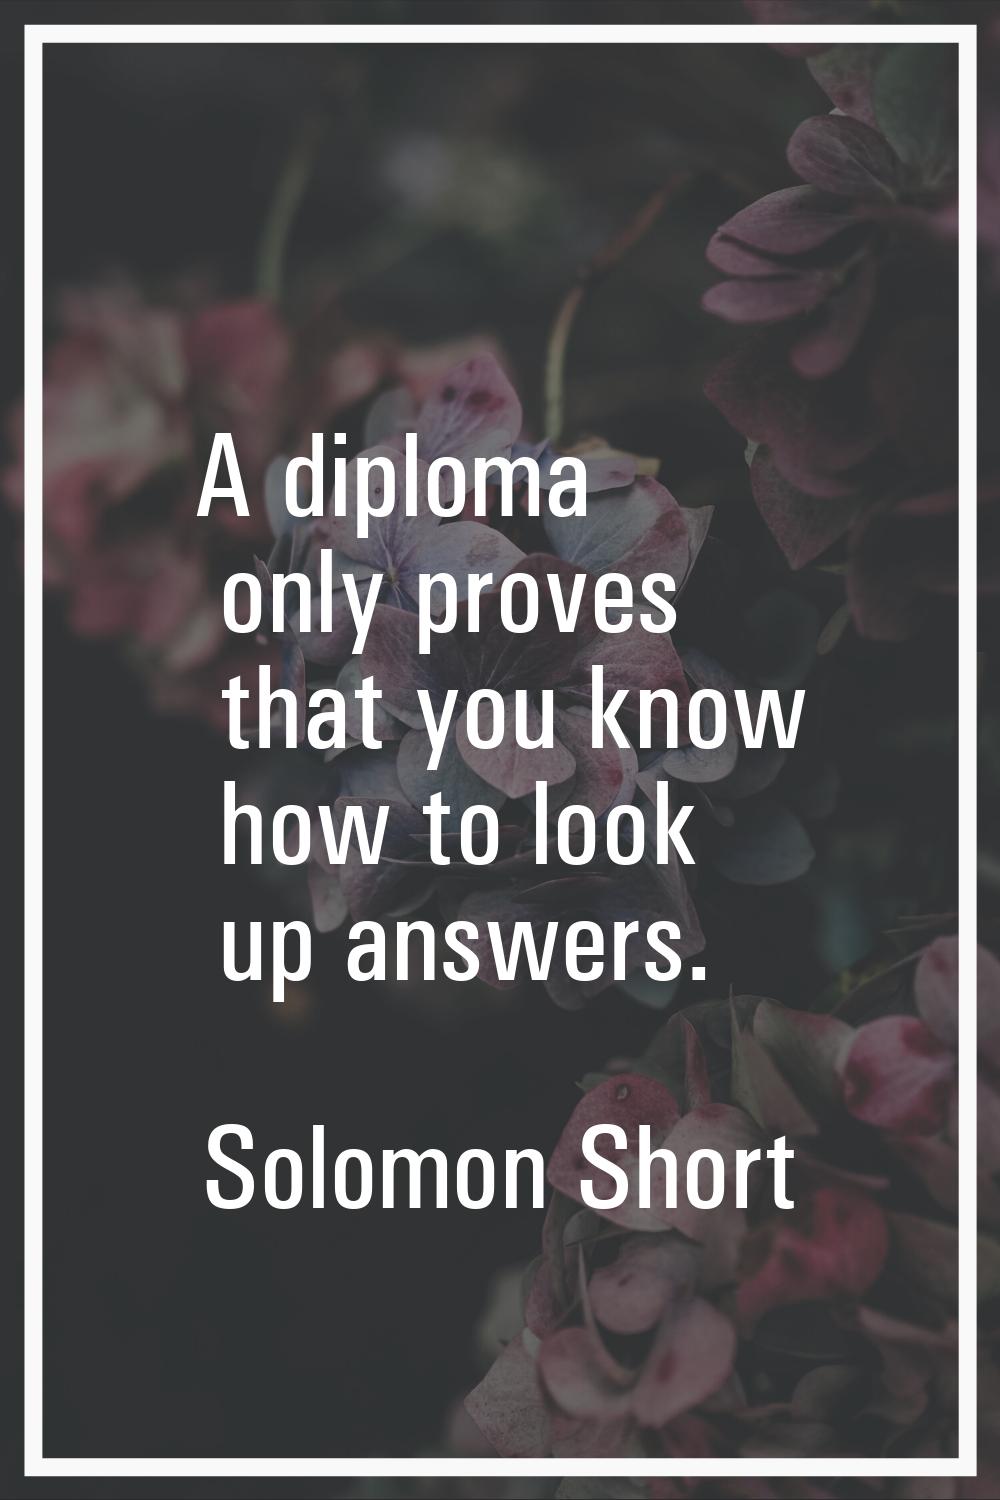 A diploma only proves that you know how to look up answers.